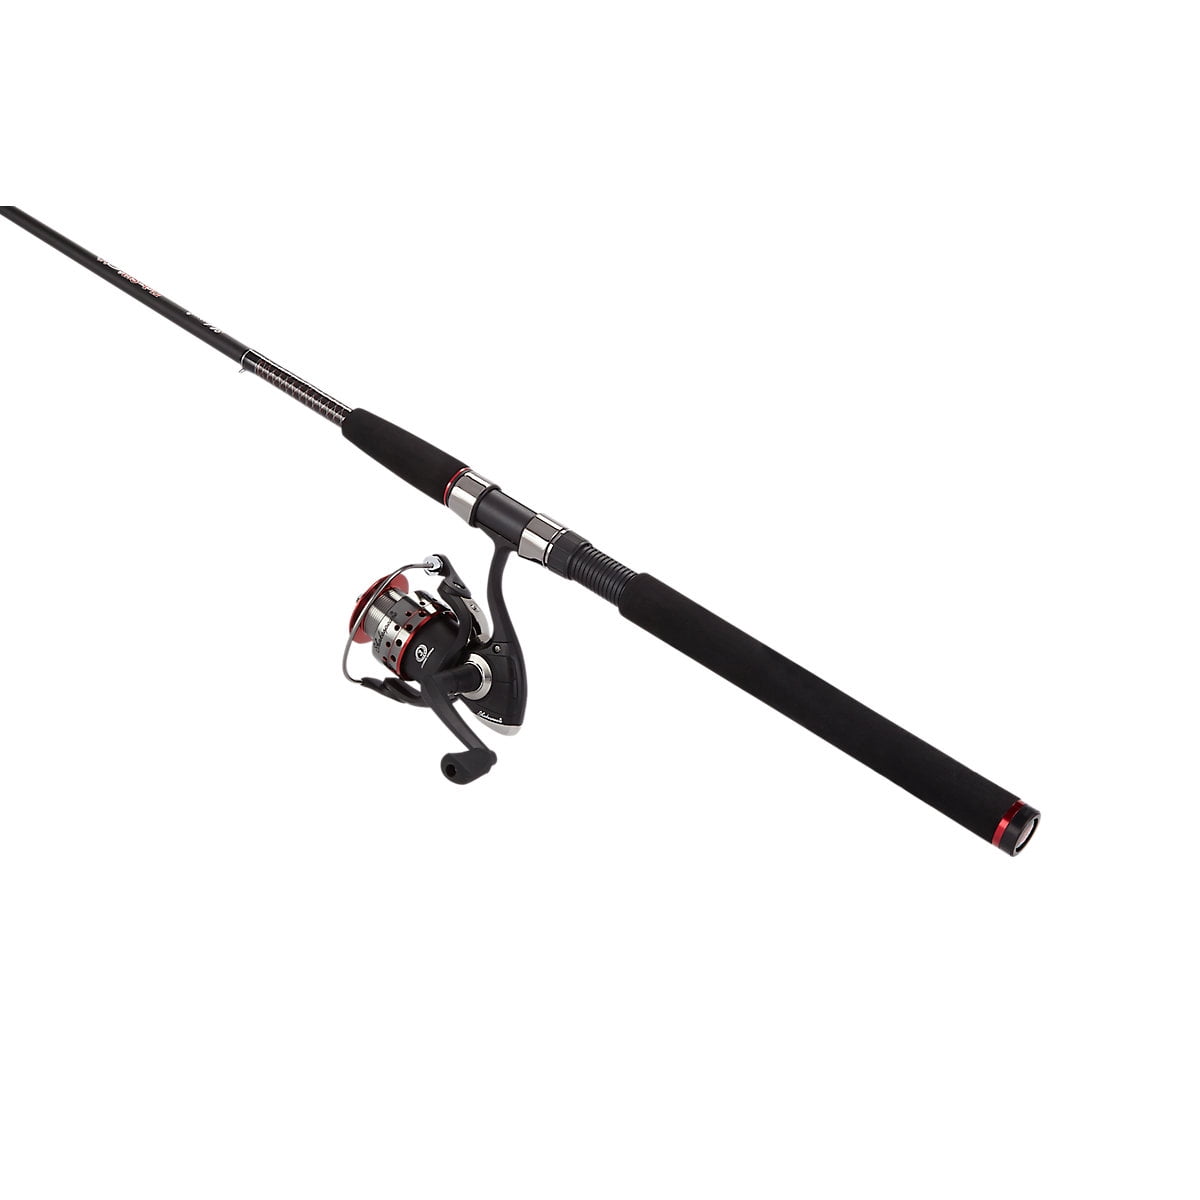 Ugly Stik 6' GX2 Spinning Fishing Rod and Reel Spinning Combo 